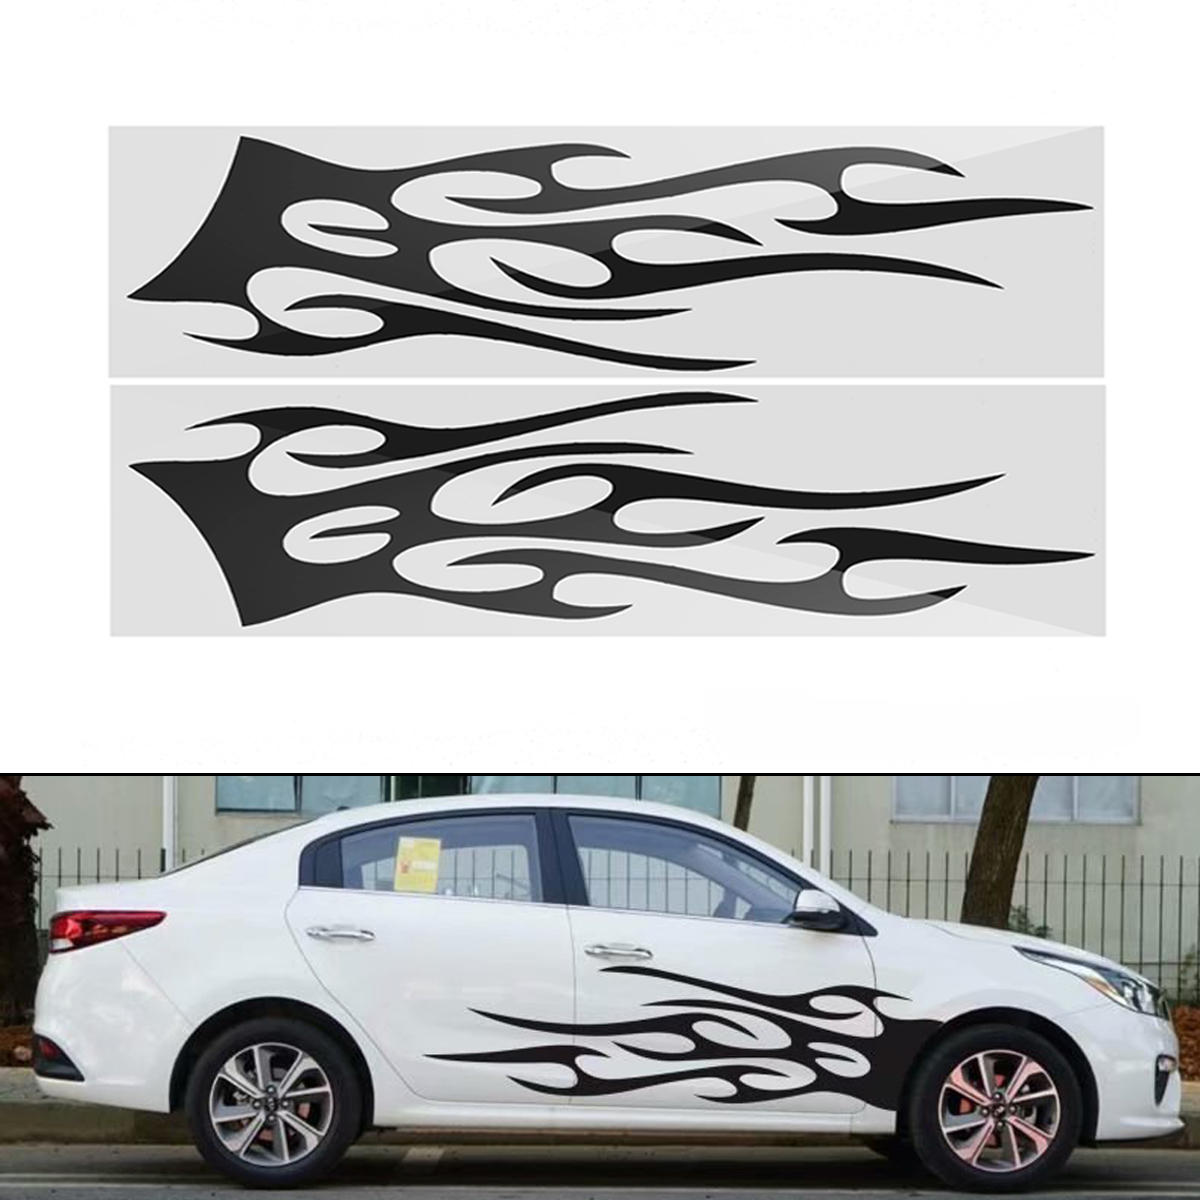 2 X Fire Stickers For Car Side Doors Pvc Washable Vinyl Sticker For Cars  Body